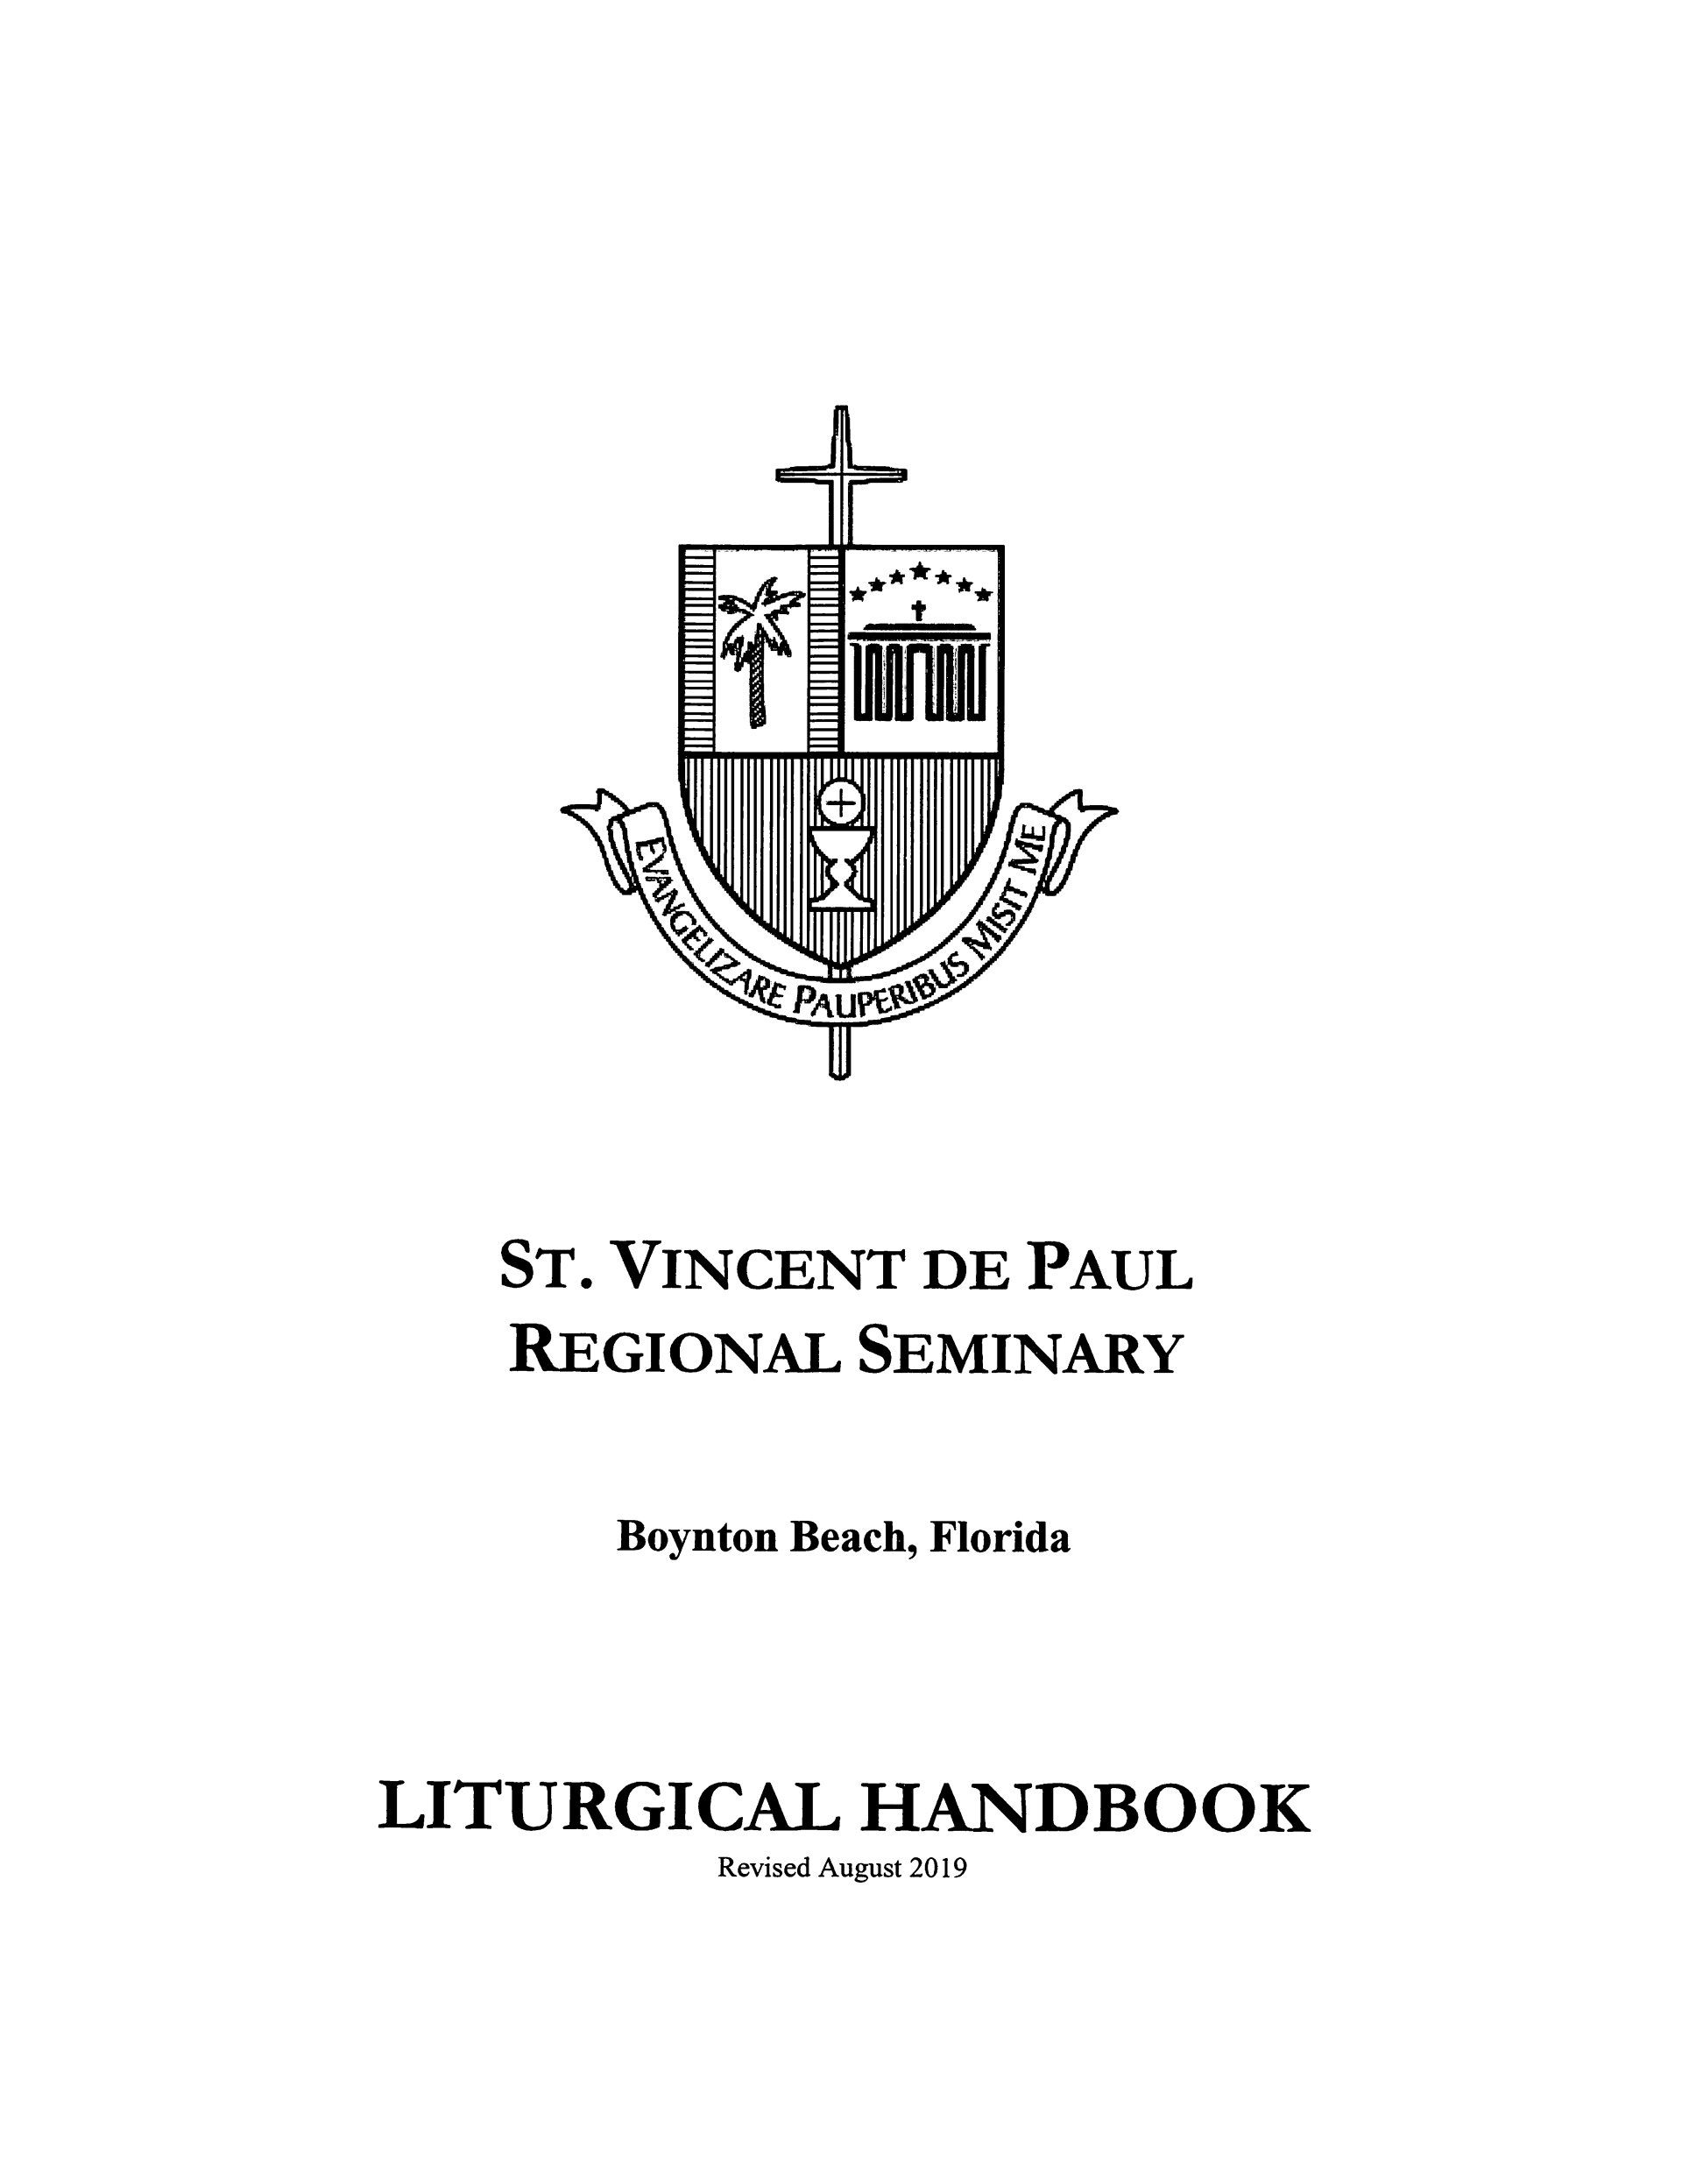 Cover Page of the Liturgical Handbook